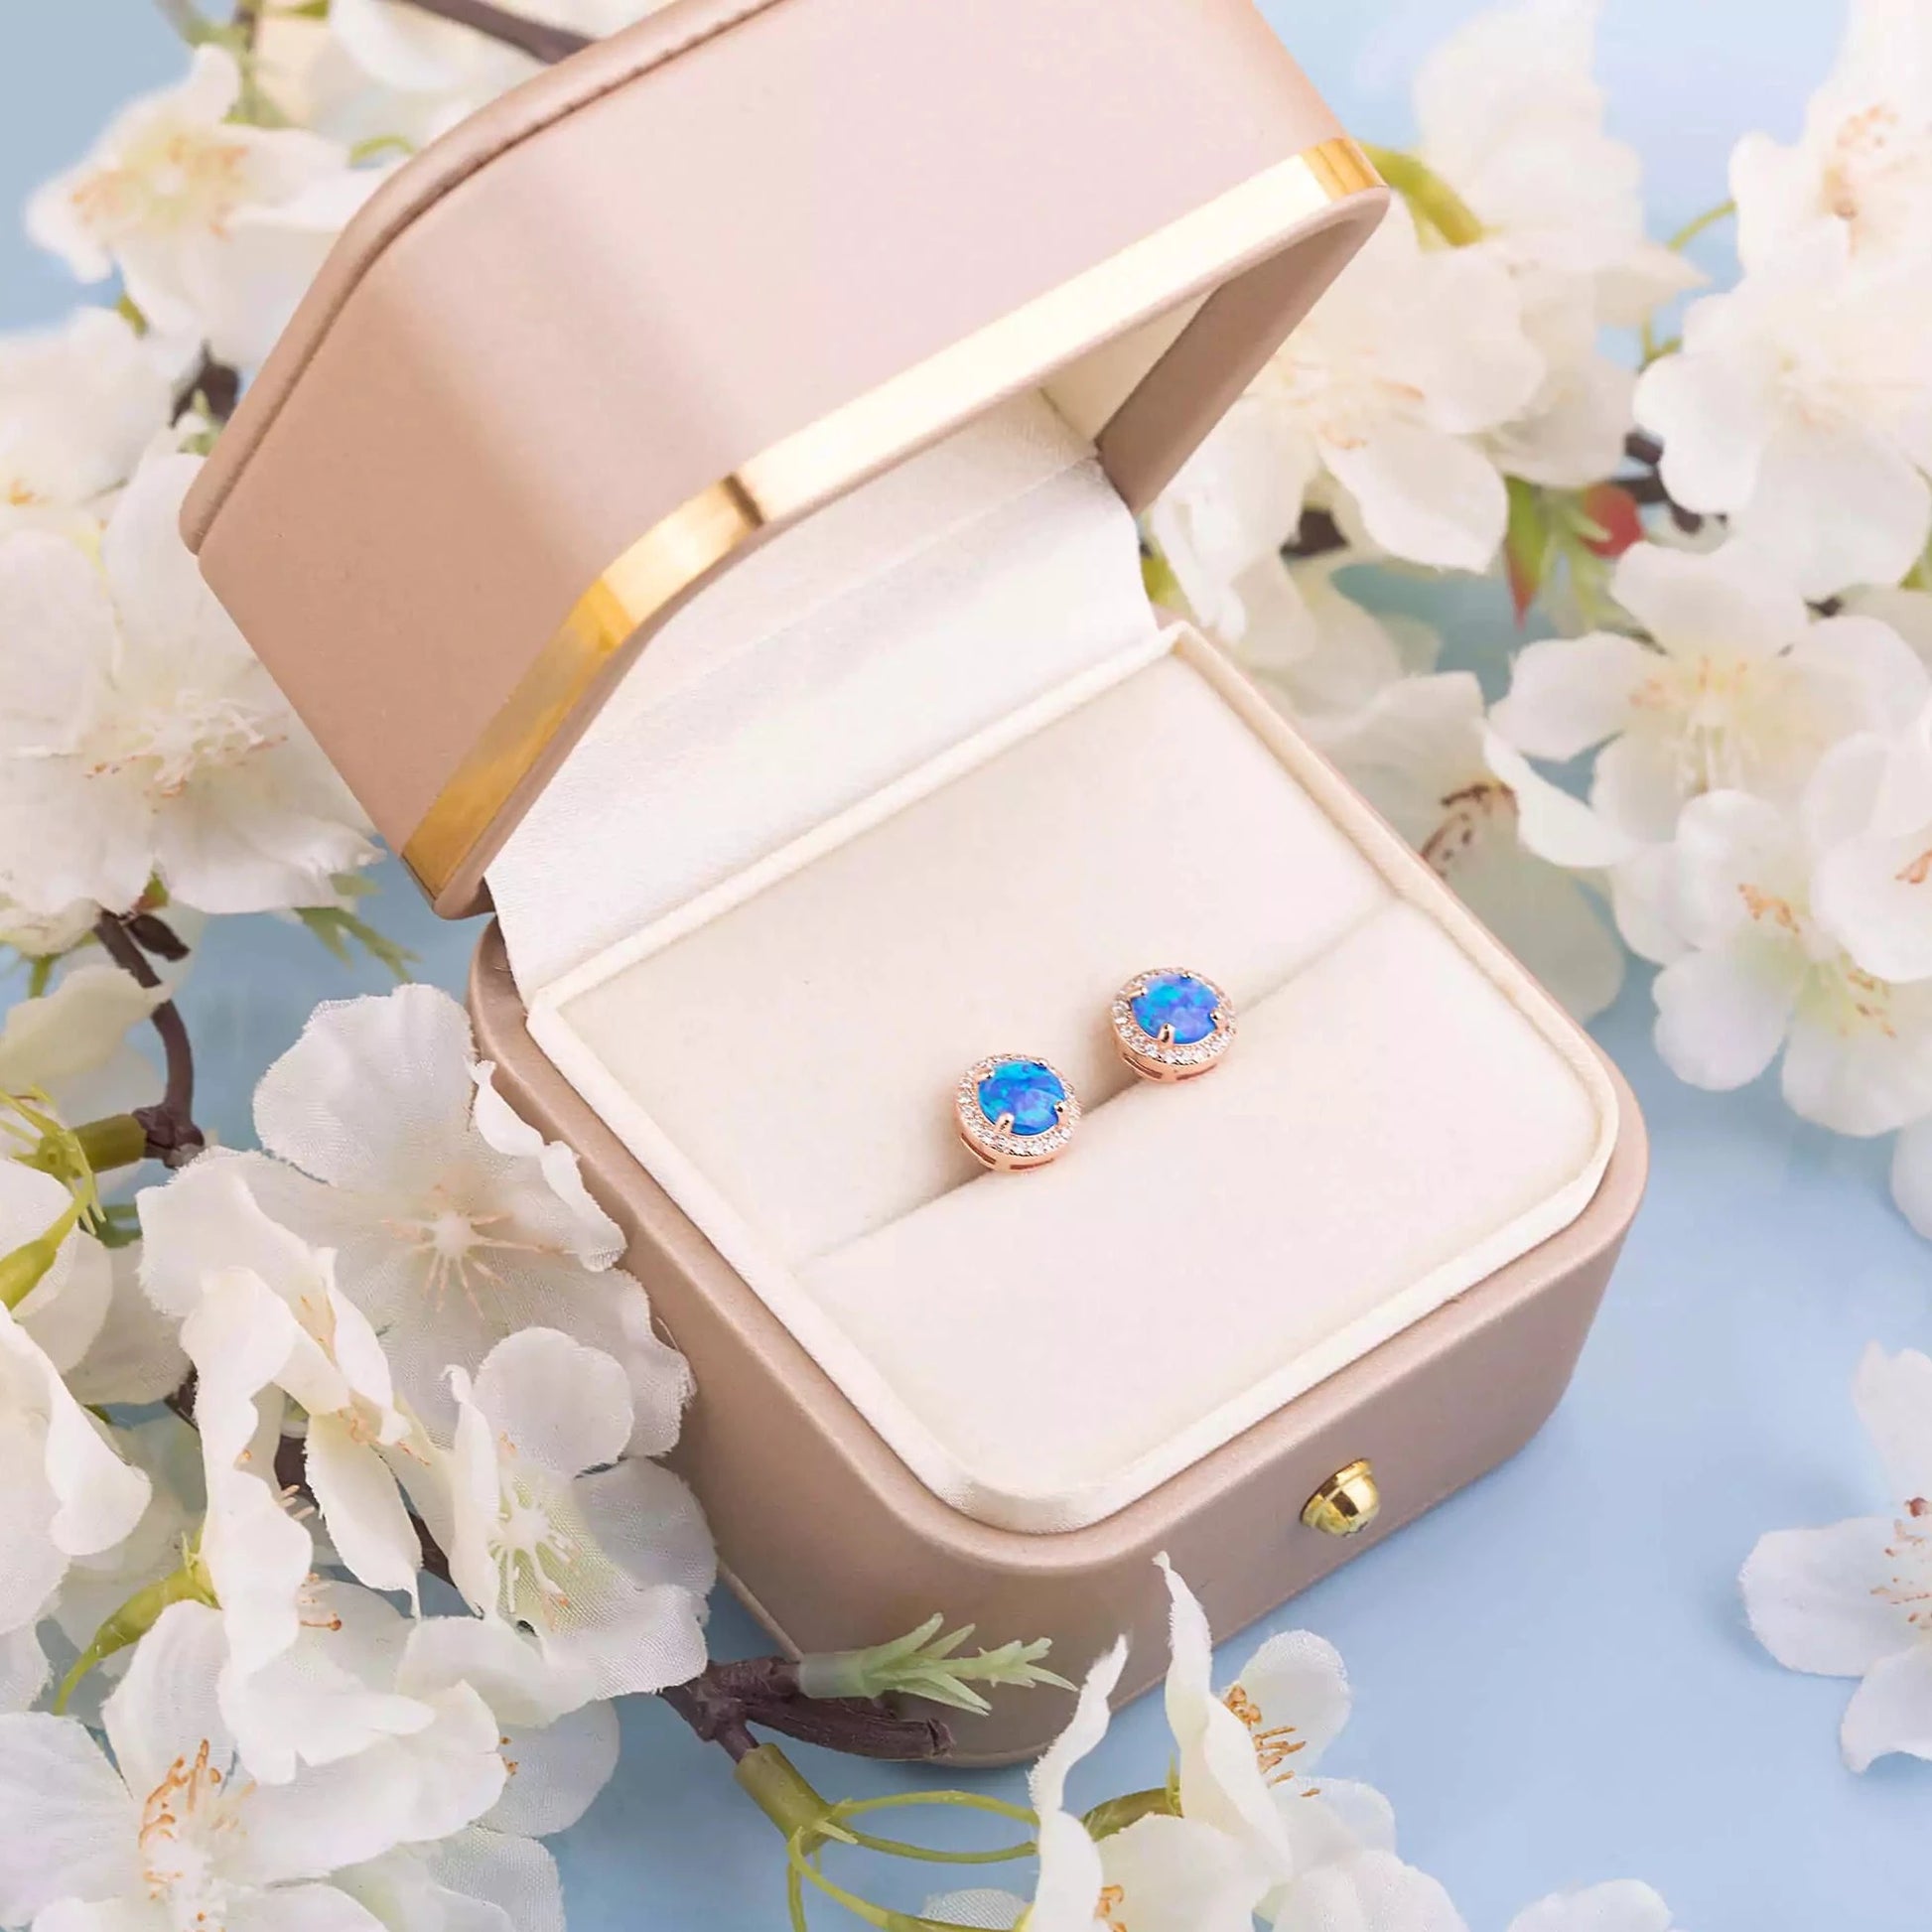 Blue Opal Round studs in a gift box